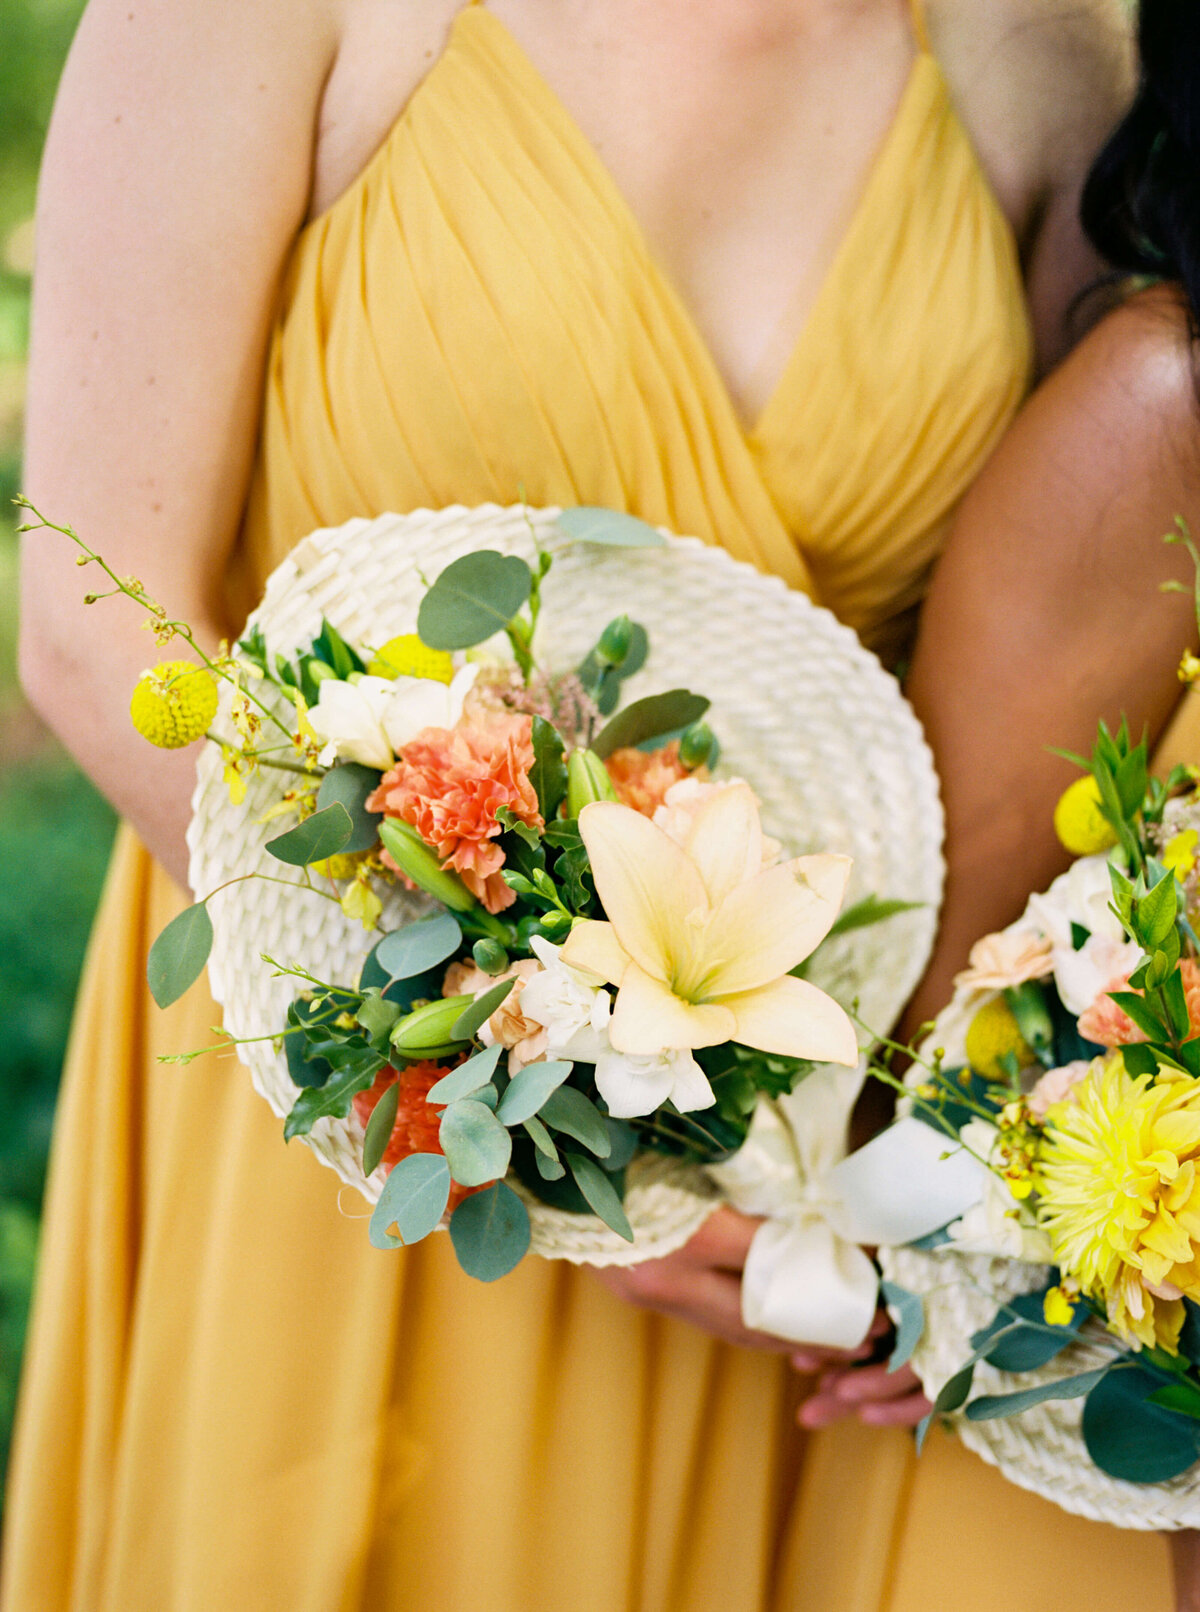 Bridesmaids wearing yellow dresses holding colorful bouquets